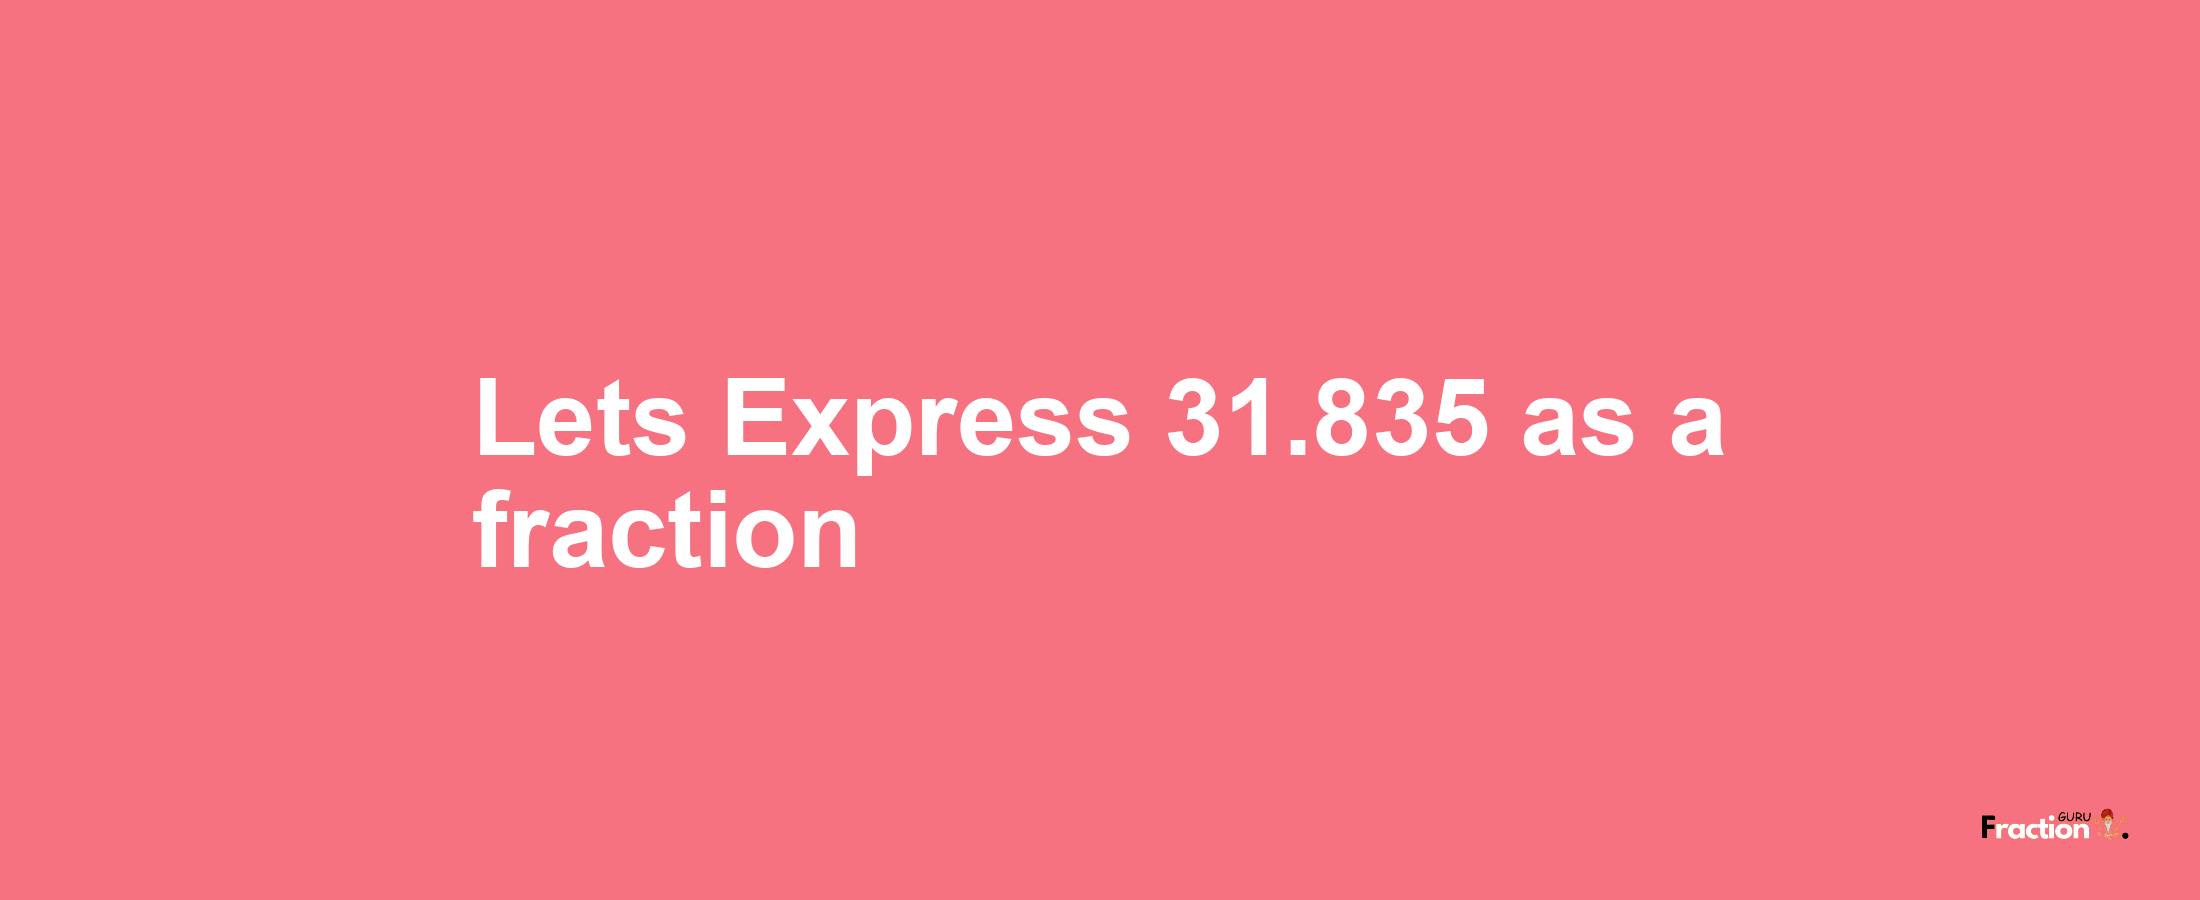 Lets Express 31.835 as afraction